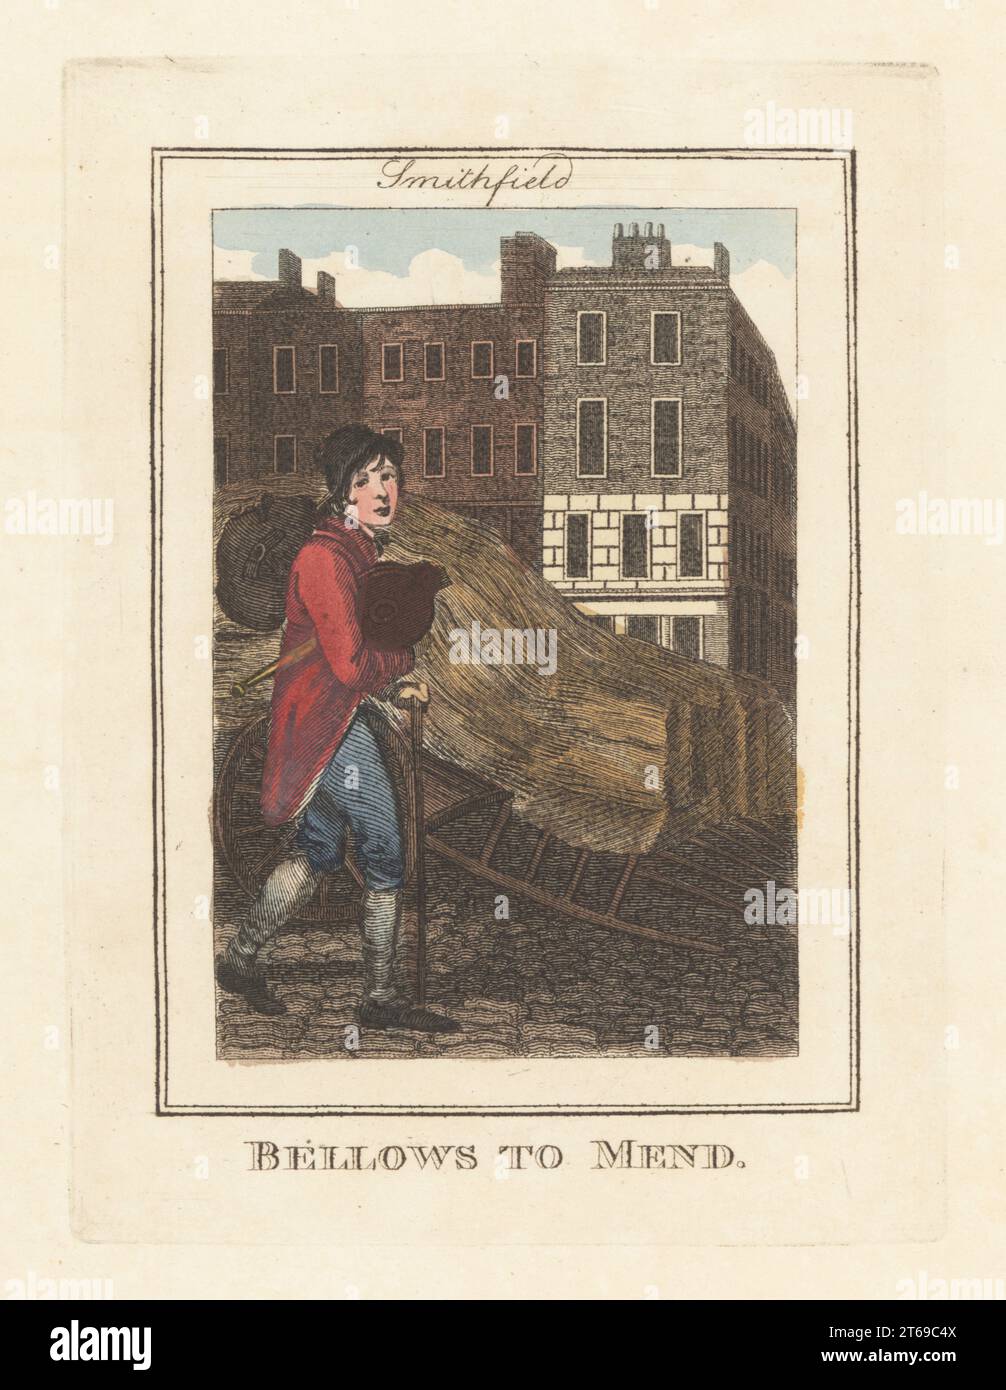 Bellows-repairer in front of a hay wagon in Smithfields Market, London. Bellows-mender in cap, coat and breeches, with bellows and tools in a bag over his shoulder. Smithfields was a cattle, sheep and hay market. Bellows to mend. Handcoloured copperplate engraving by Edward Edwards after an illustration by William Marshall Craig from Description of the Plates Representing the Itinerant Traders of London, Richard Phillips, No. 71 St Pauls Churchyard, London, 1805. Stock Photo